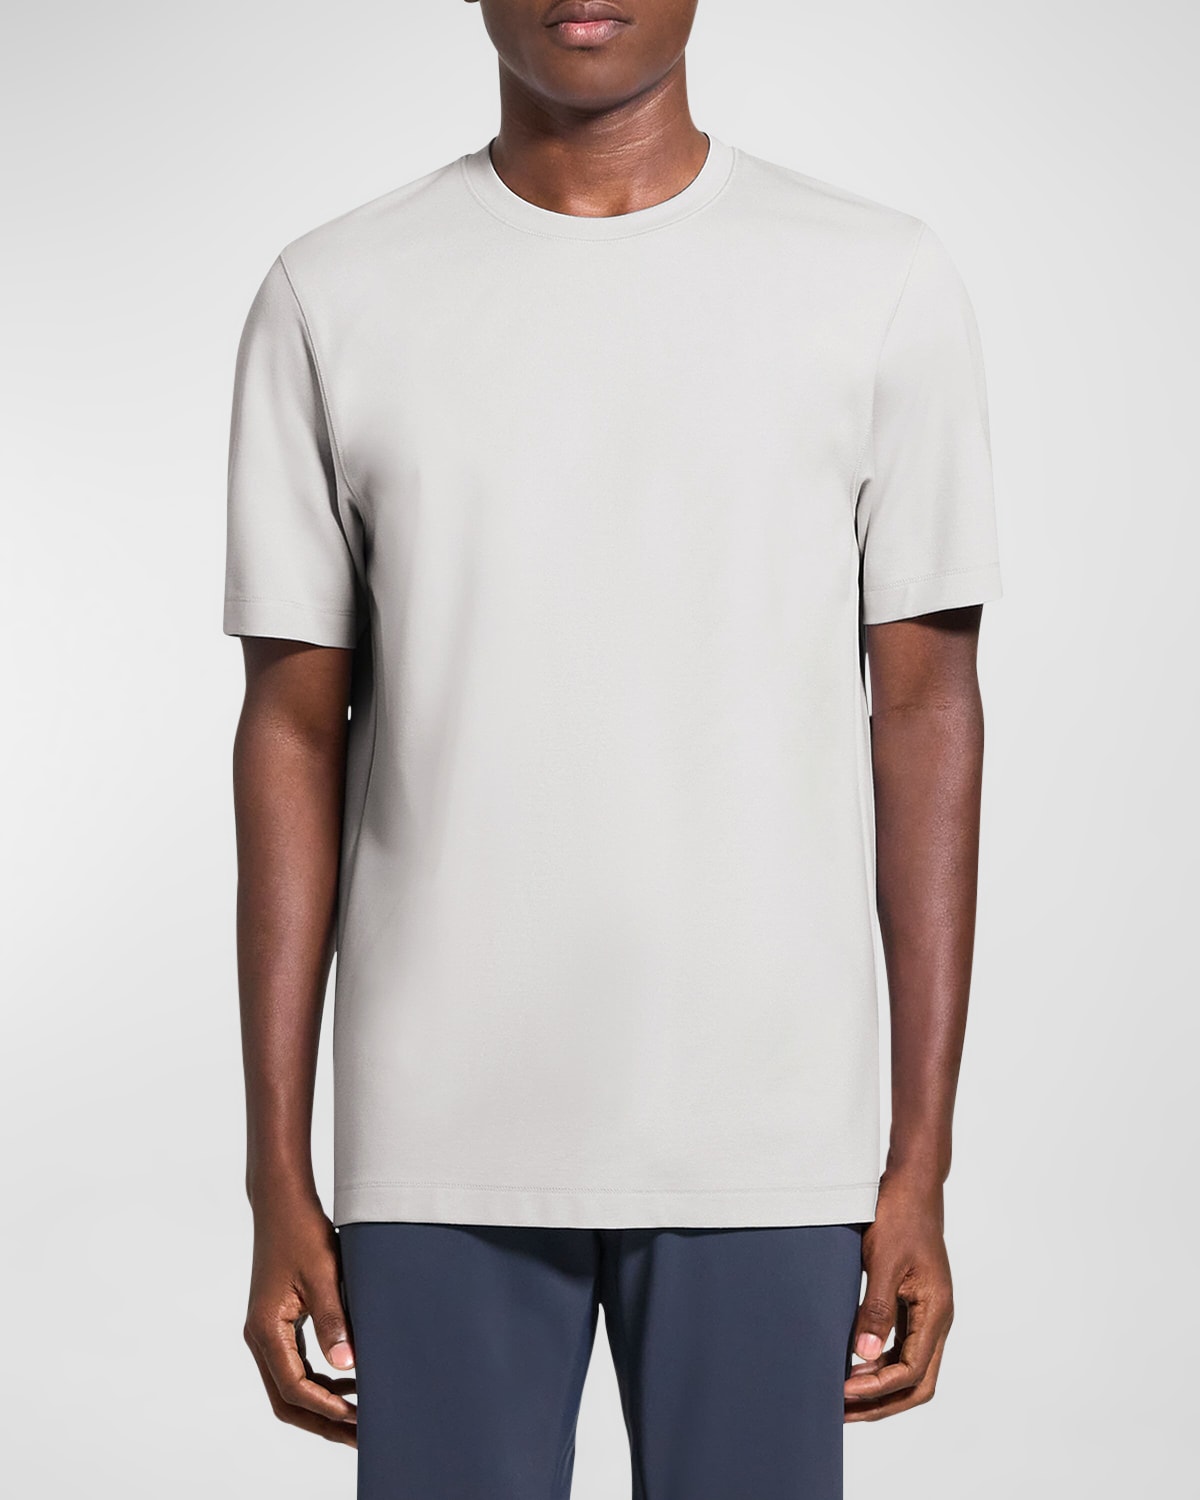 THEORY MEN'S RYDER SOLID JERSEY T-SHIRT